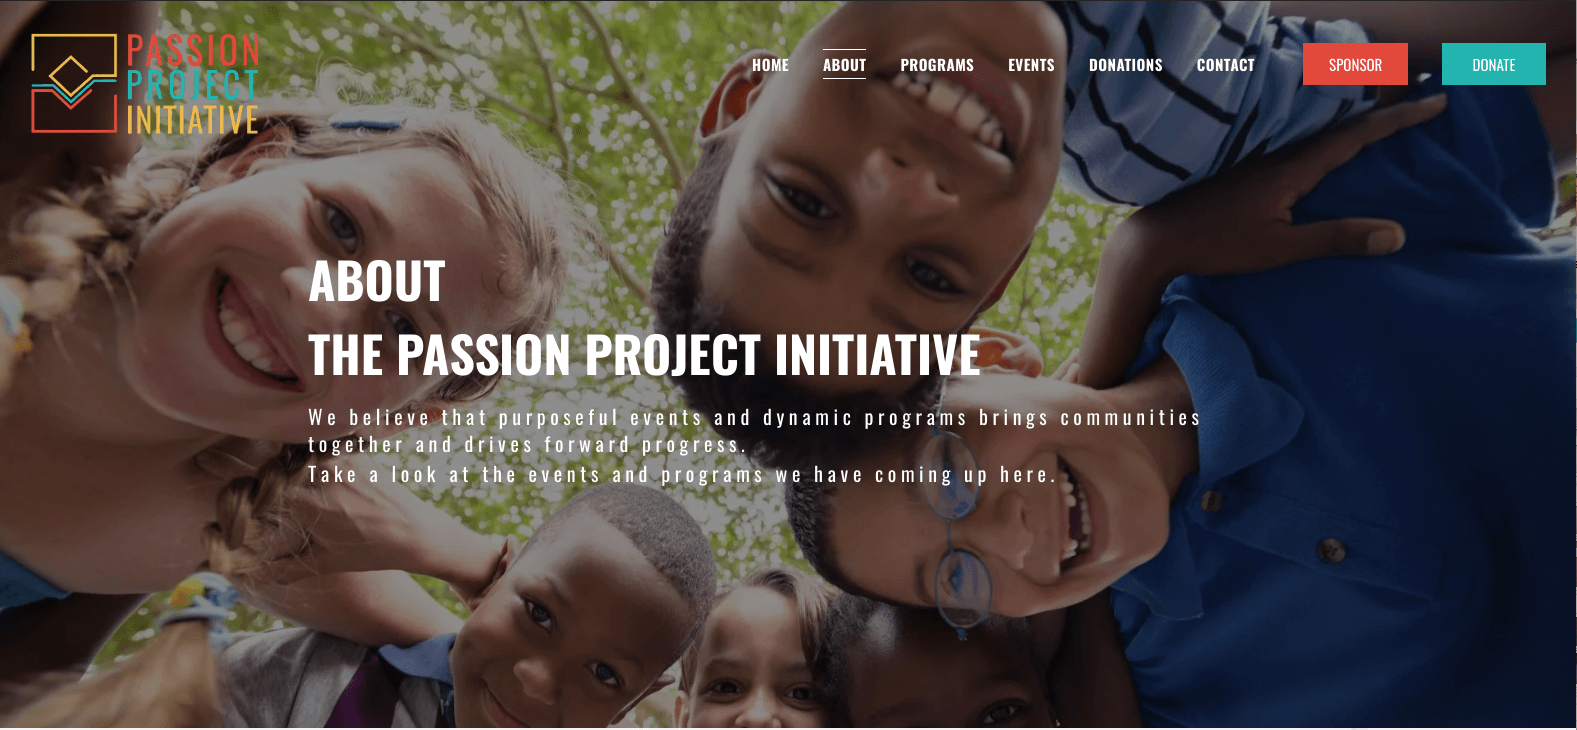 Passion Project Initiative About Page